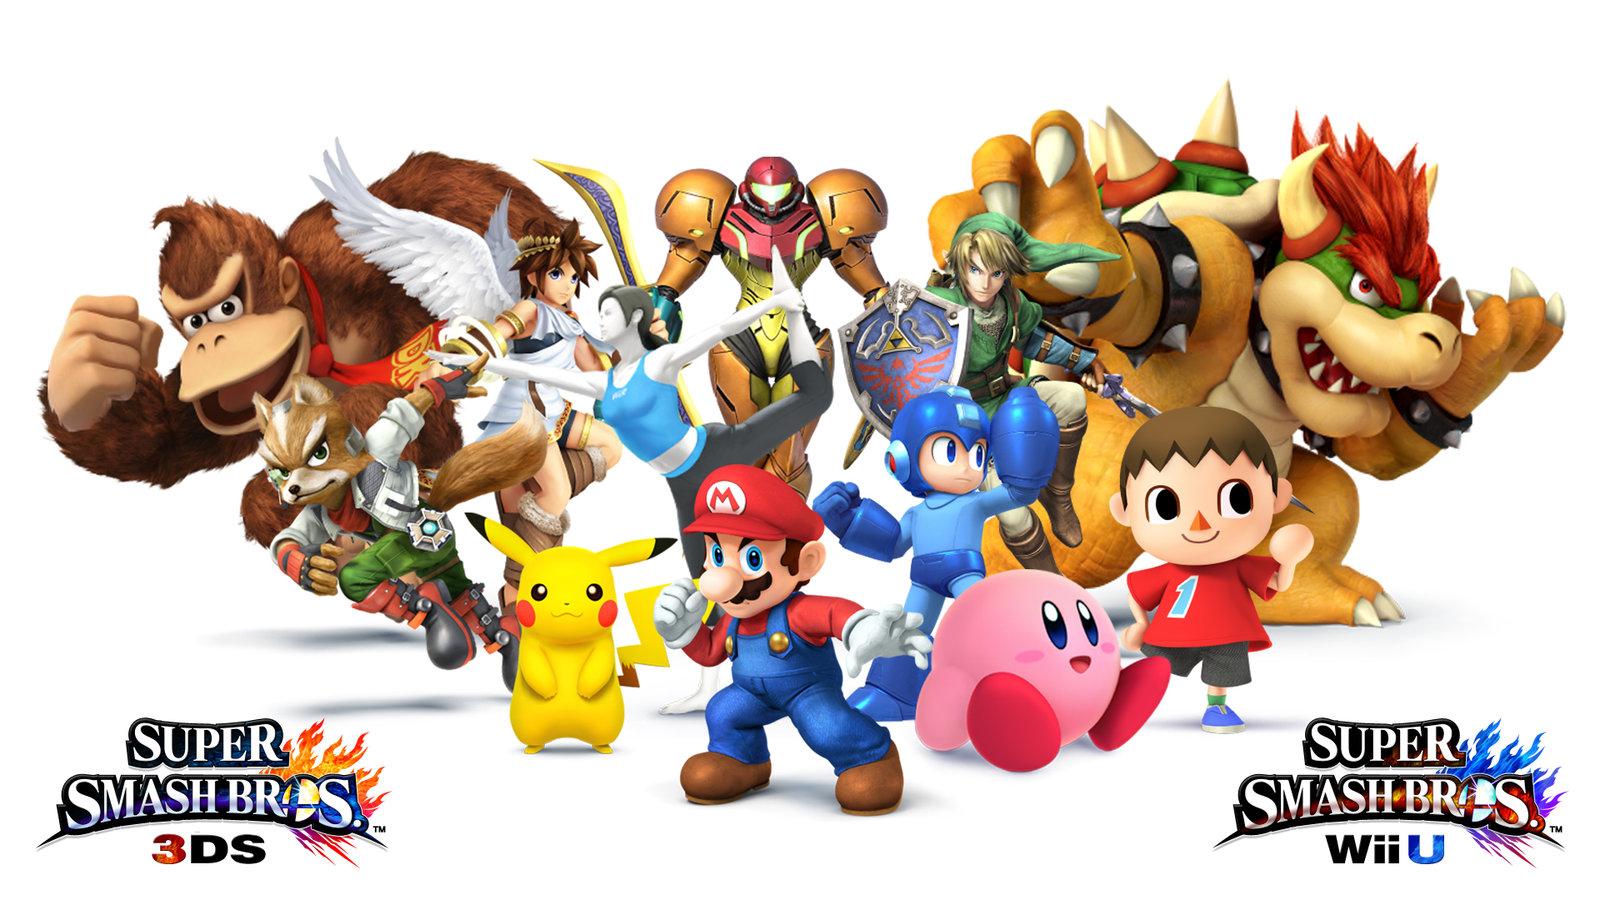 Super smash bros wii u 3ds - - High Quality and other